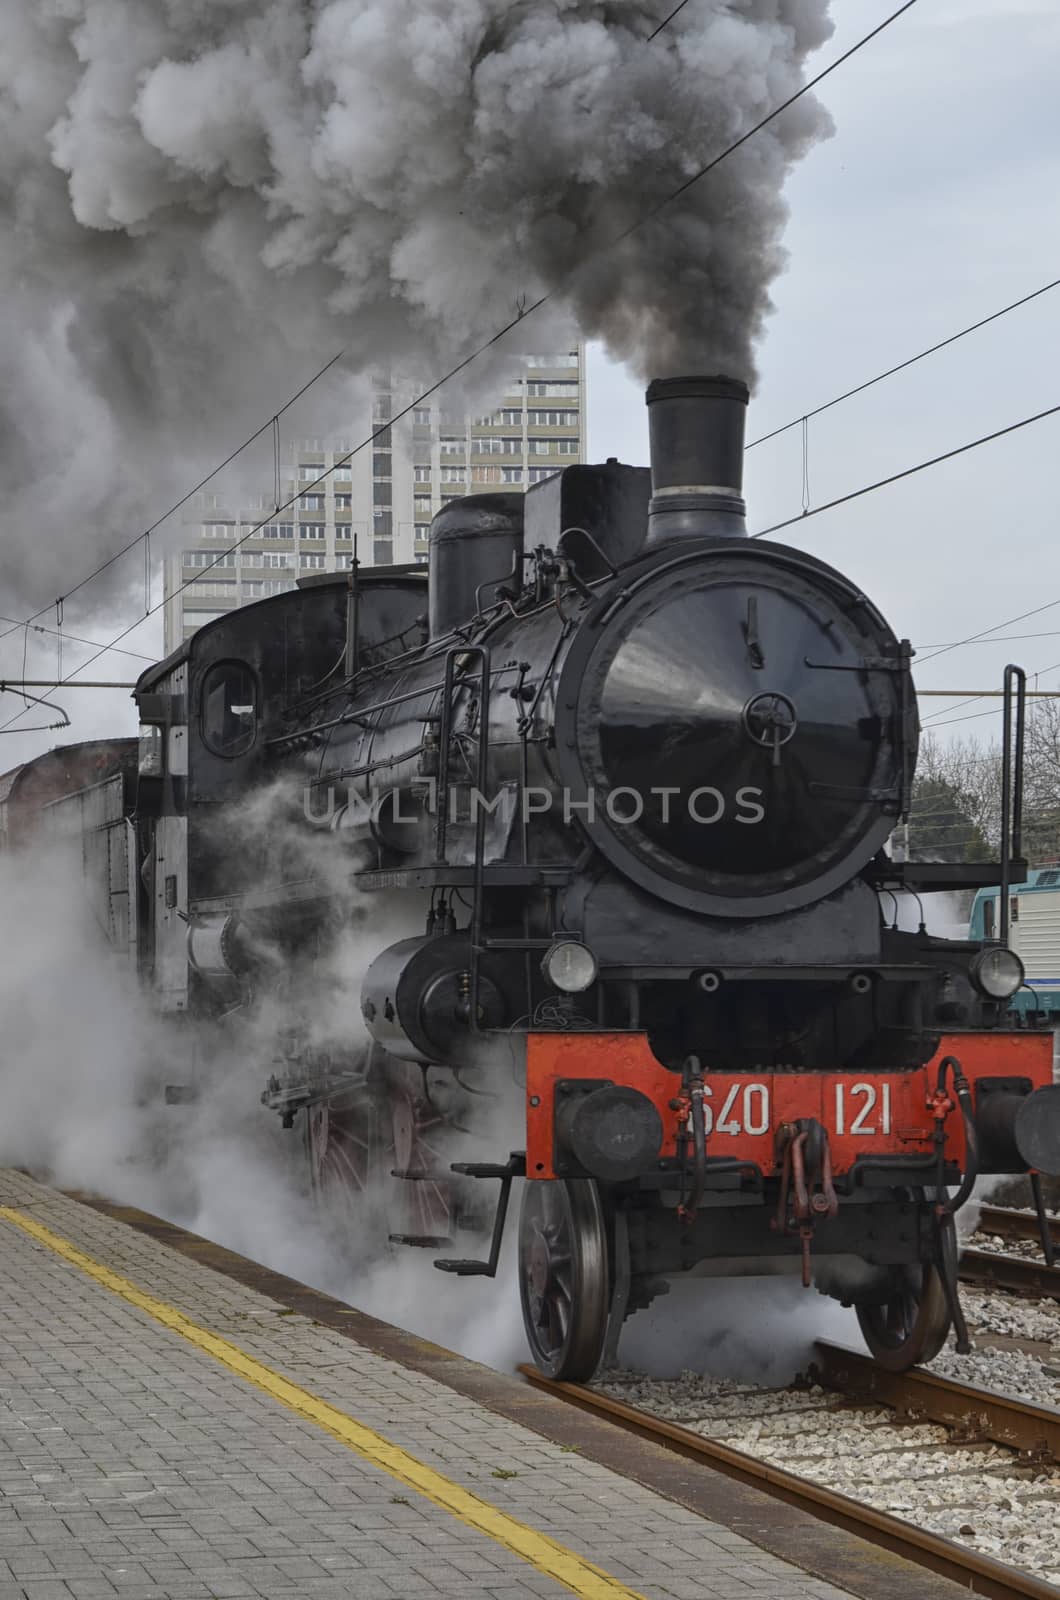 View of classic train in clouds of smoke